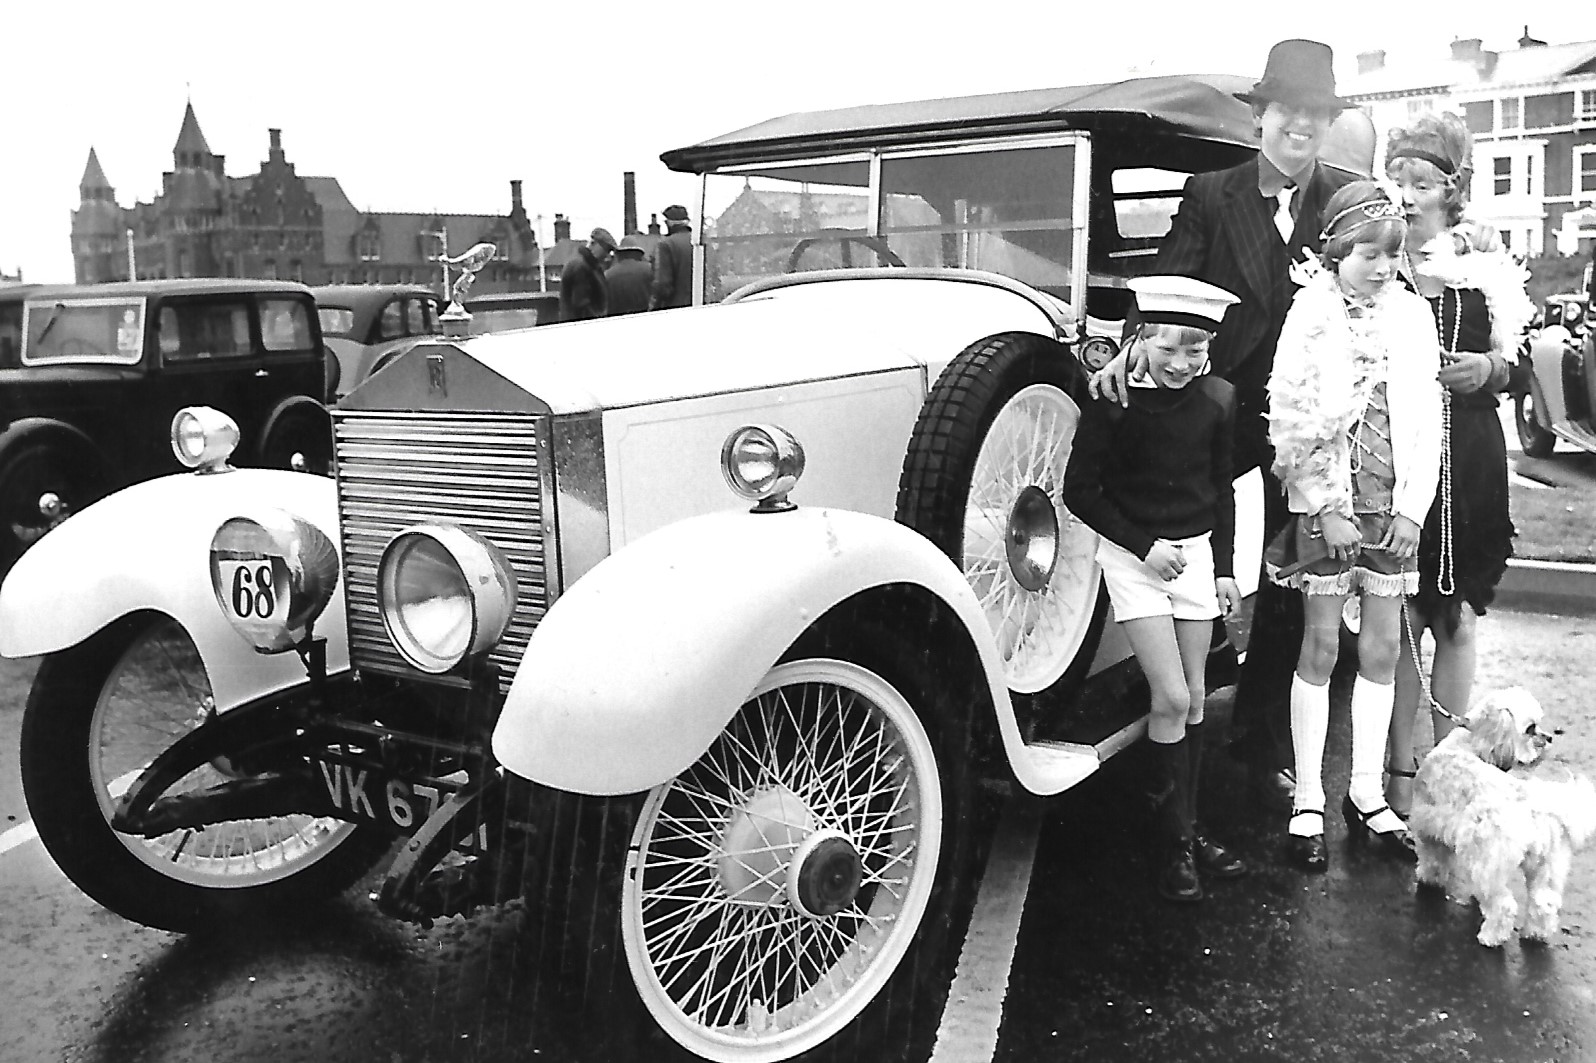 This vintage Rolls Royce is the star of the show at a Vintage Car Rally in the Floral Hall Gardens in Southport in May 1982